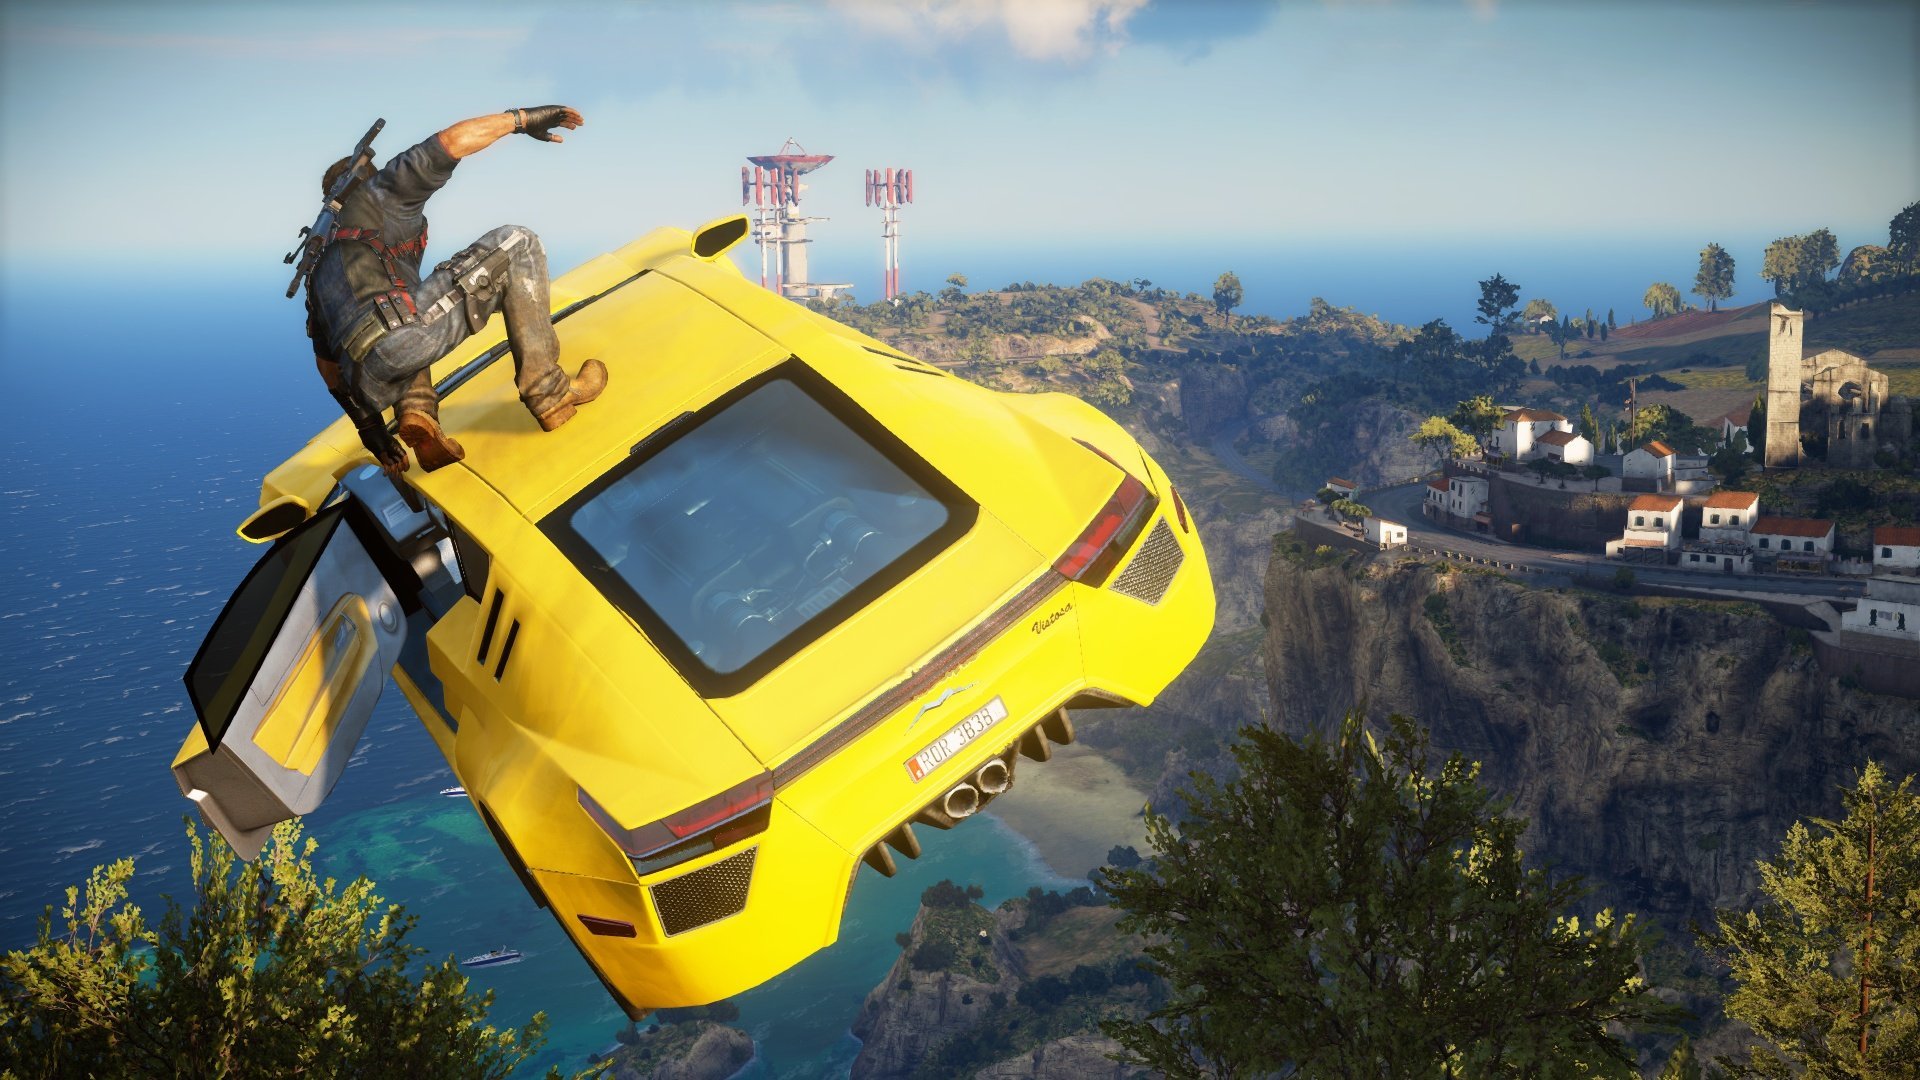 Download hd 1920x1080 Just Cause 3 desktop background ID:137940 for free